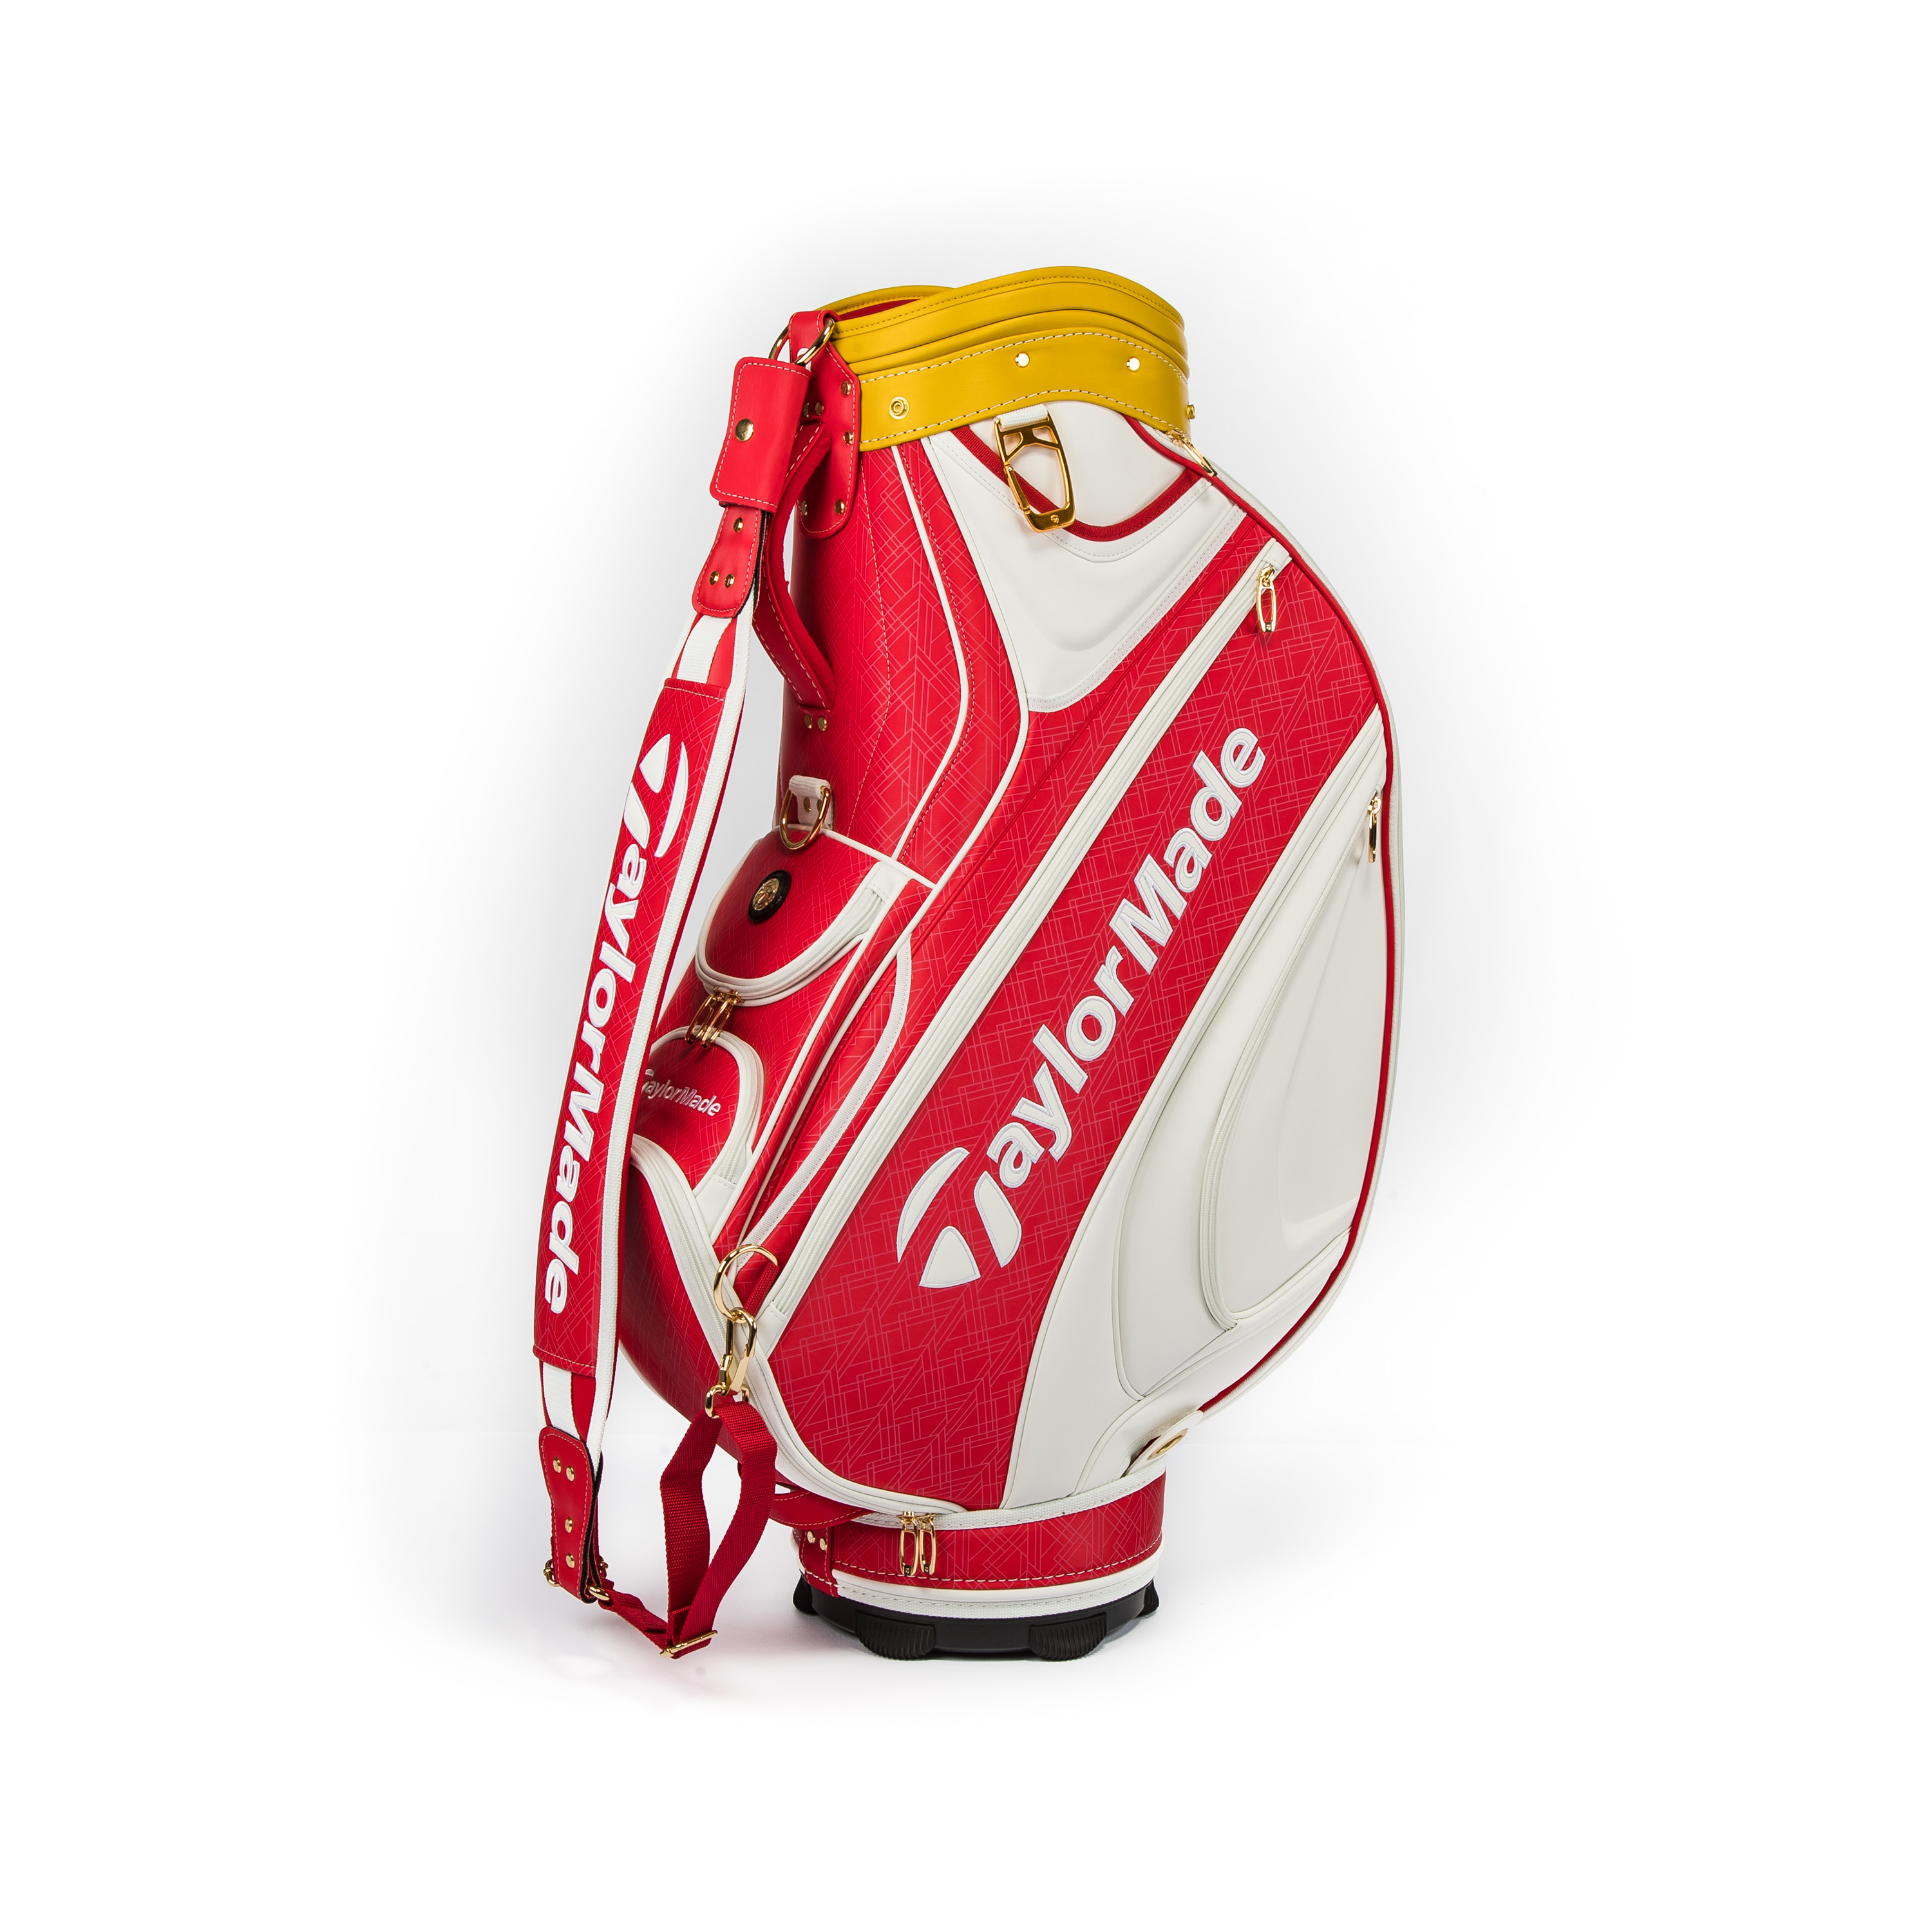 TaylorMade release Open inspired bags and headcover